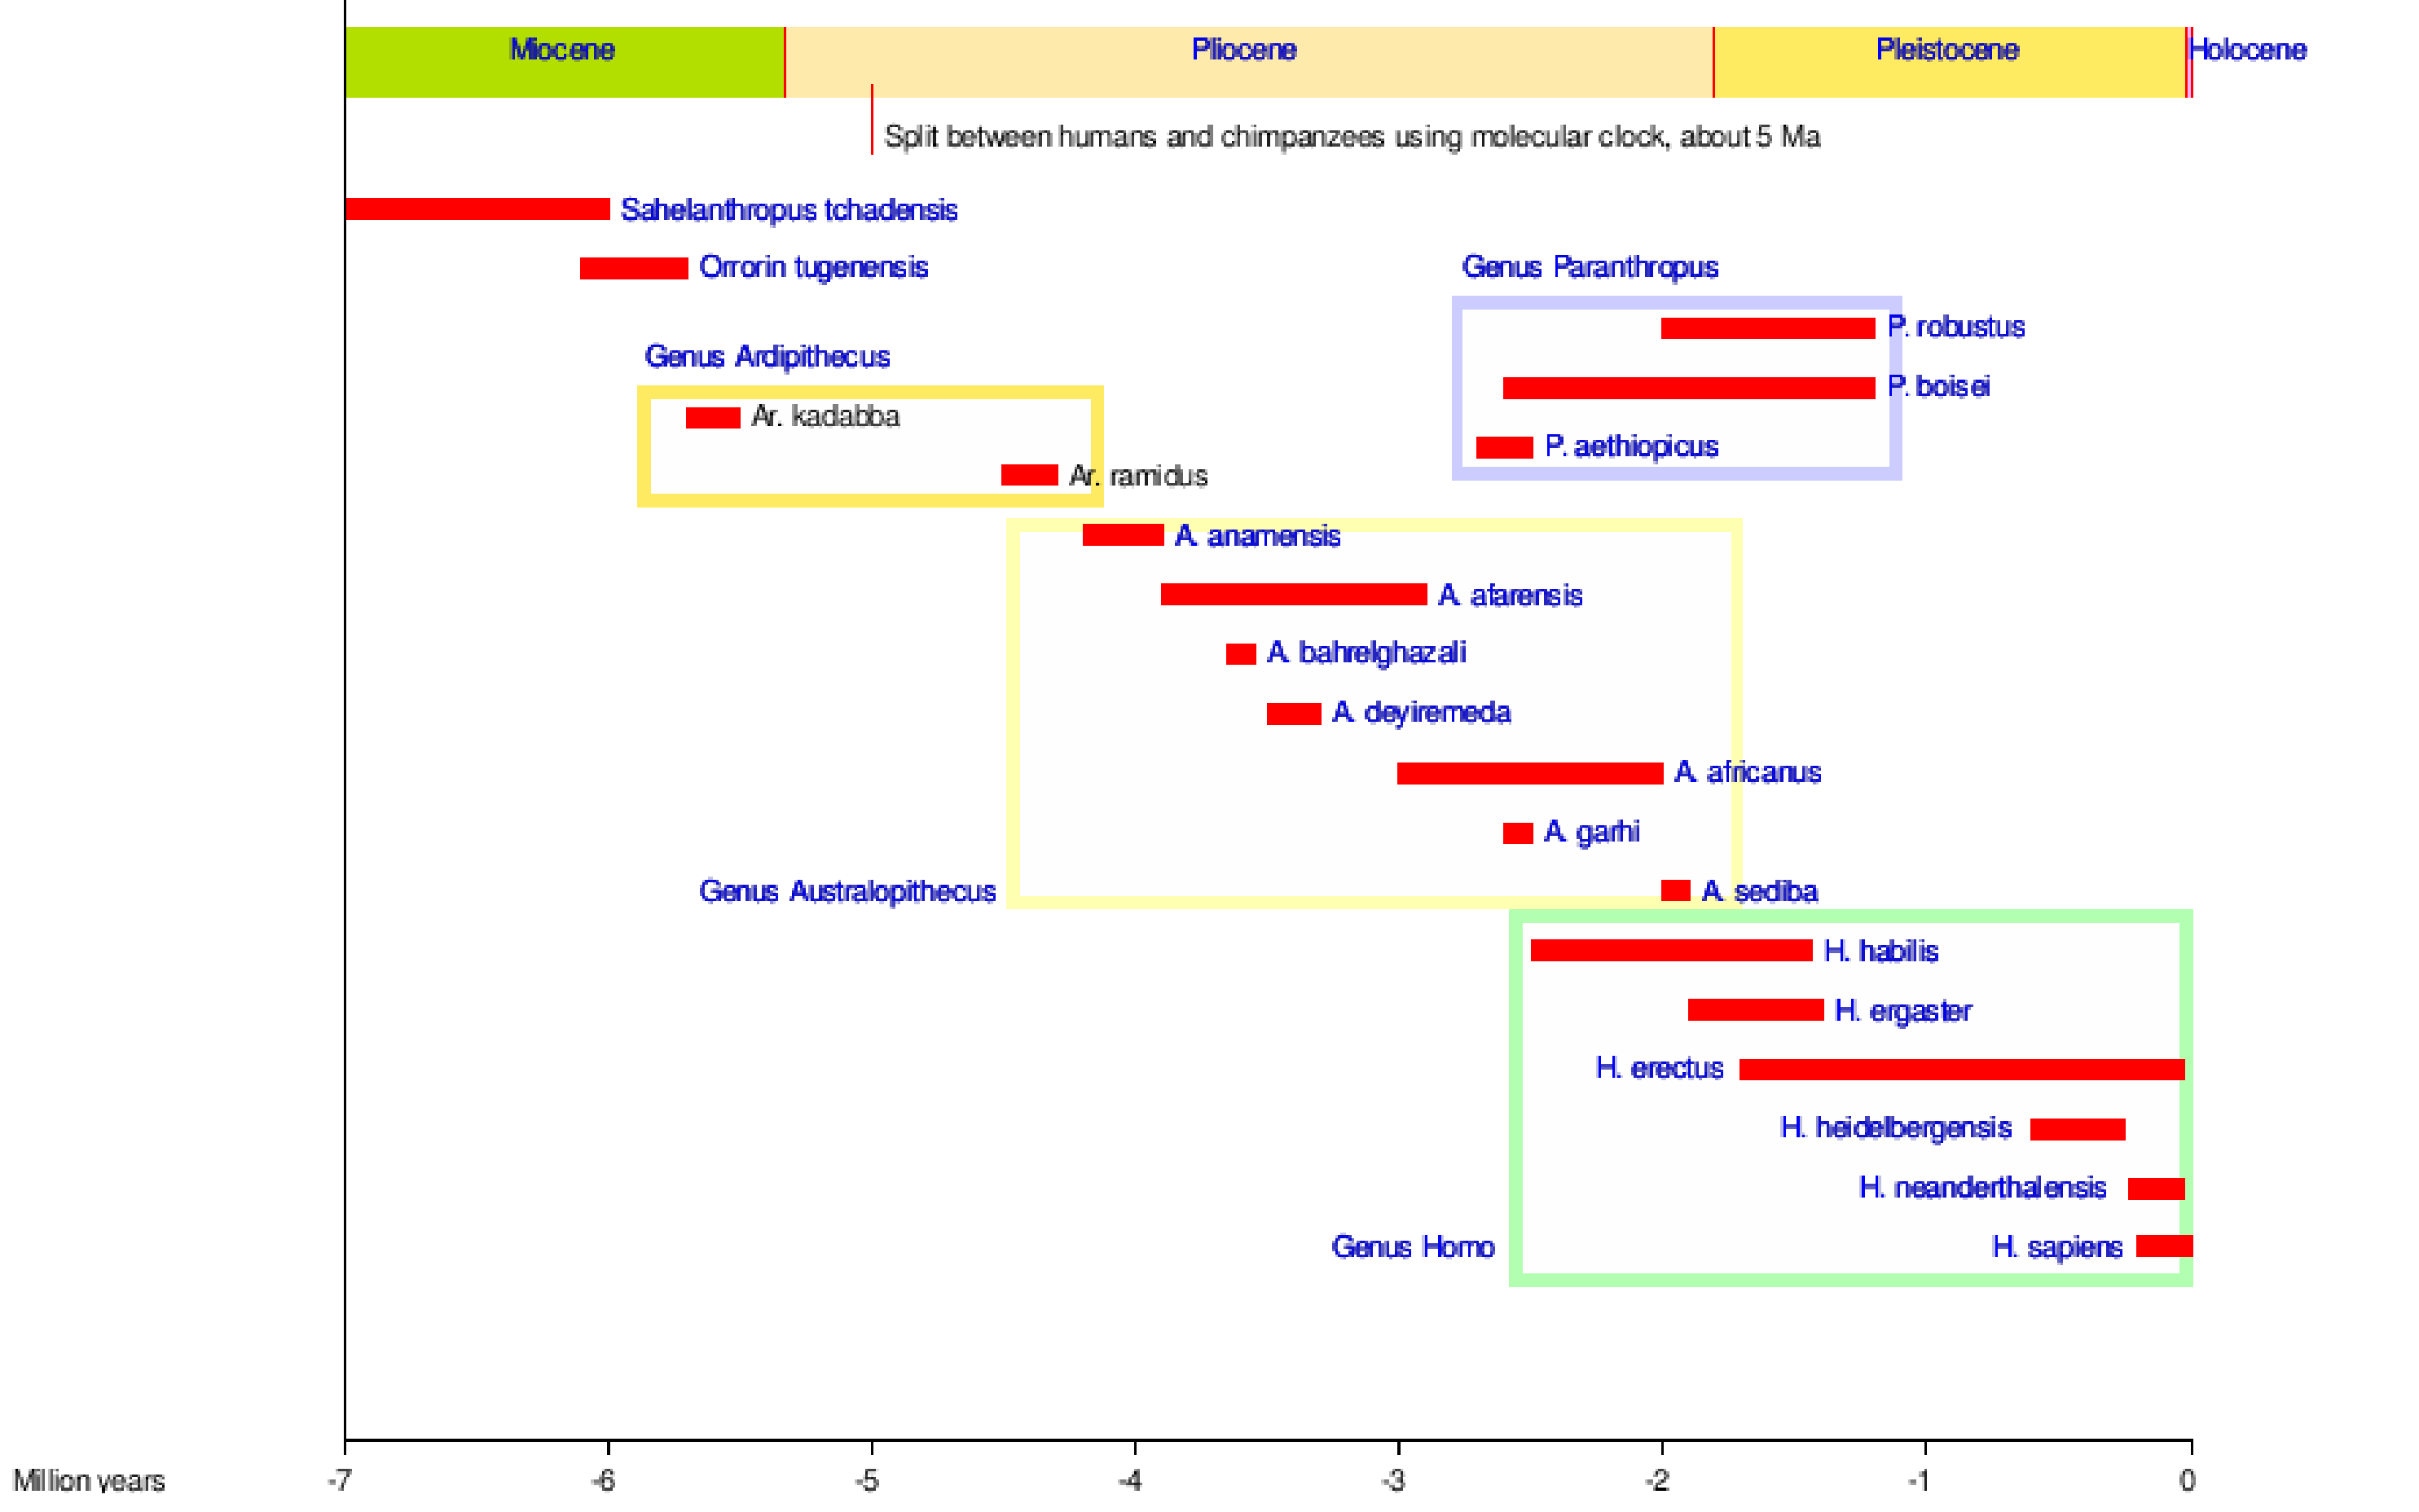 Graph of Hominin species through time